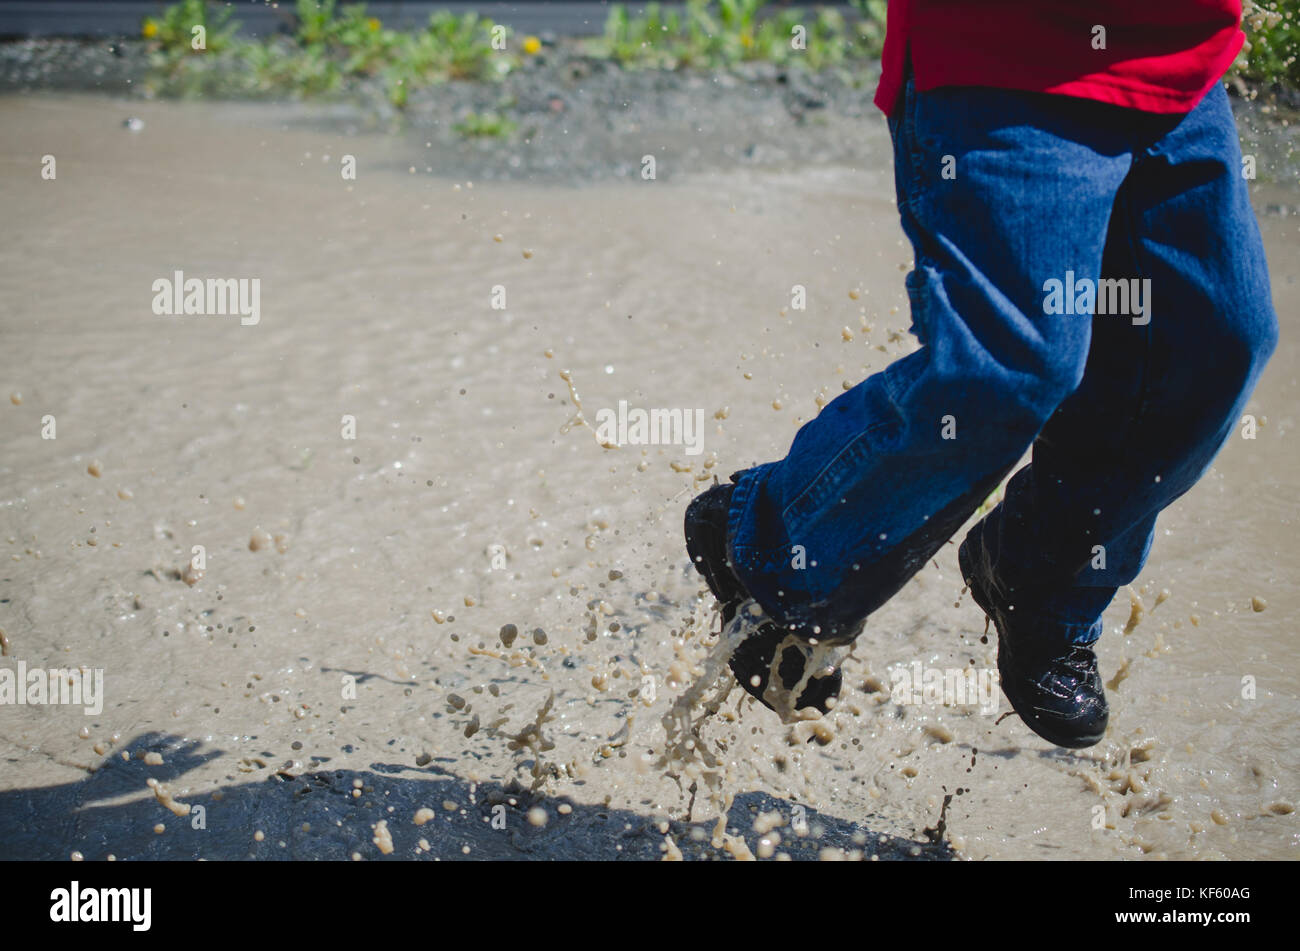 Playing In The Mud High Resolution Stock Photography and Images - Alamy